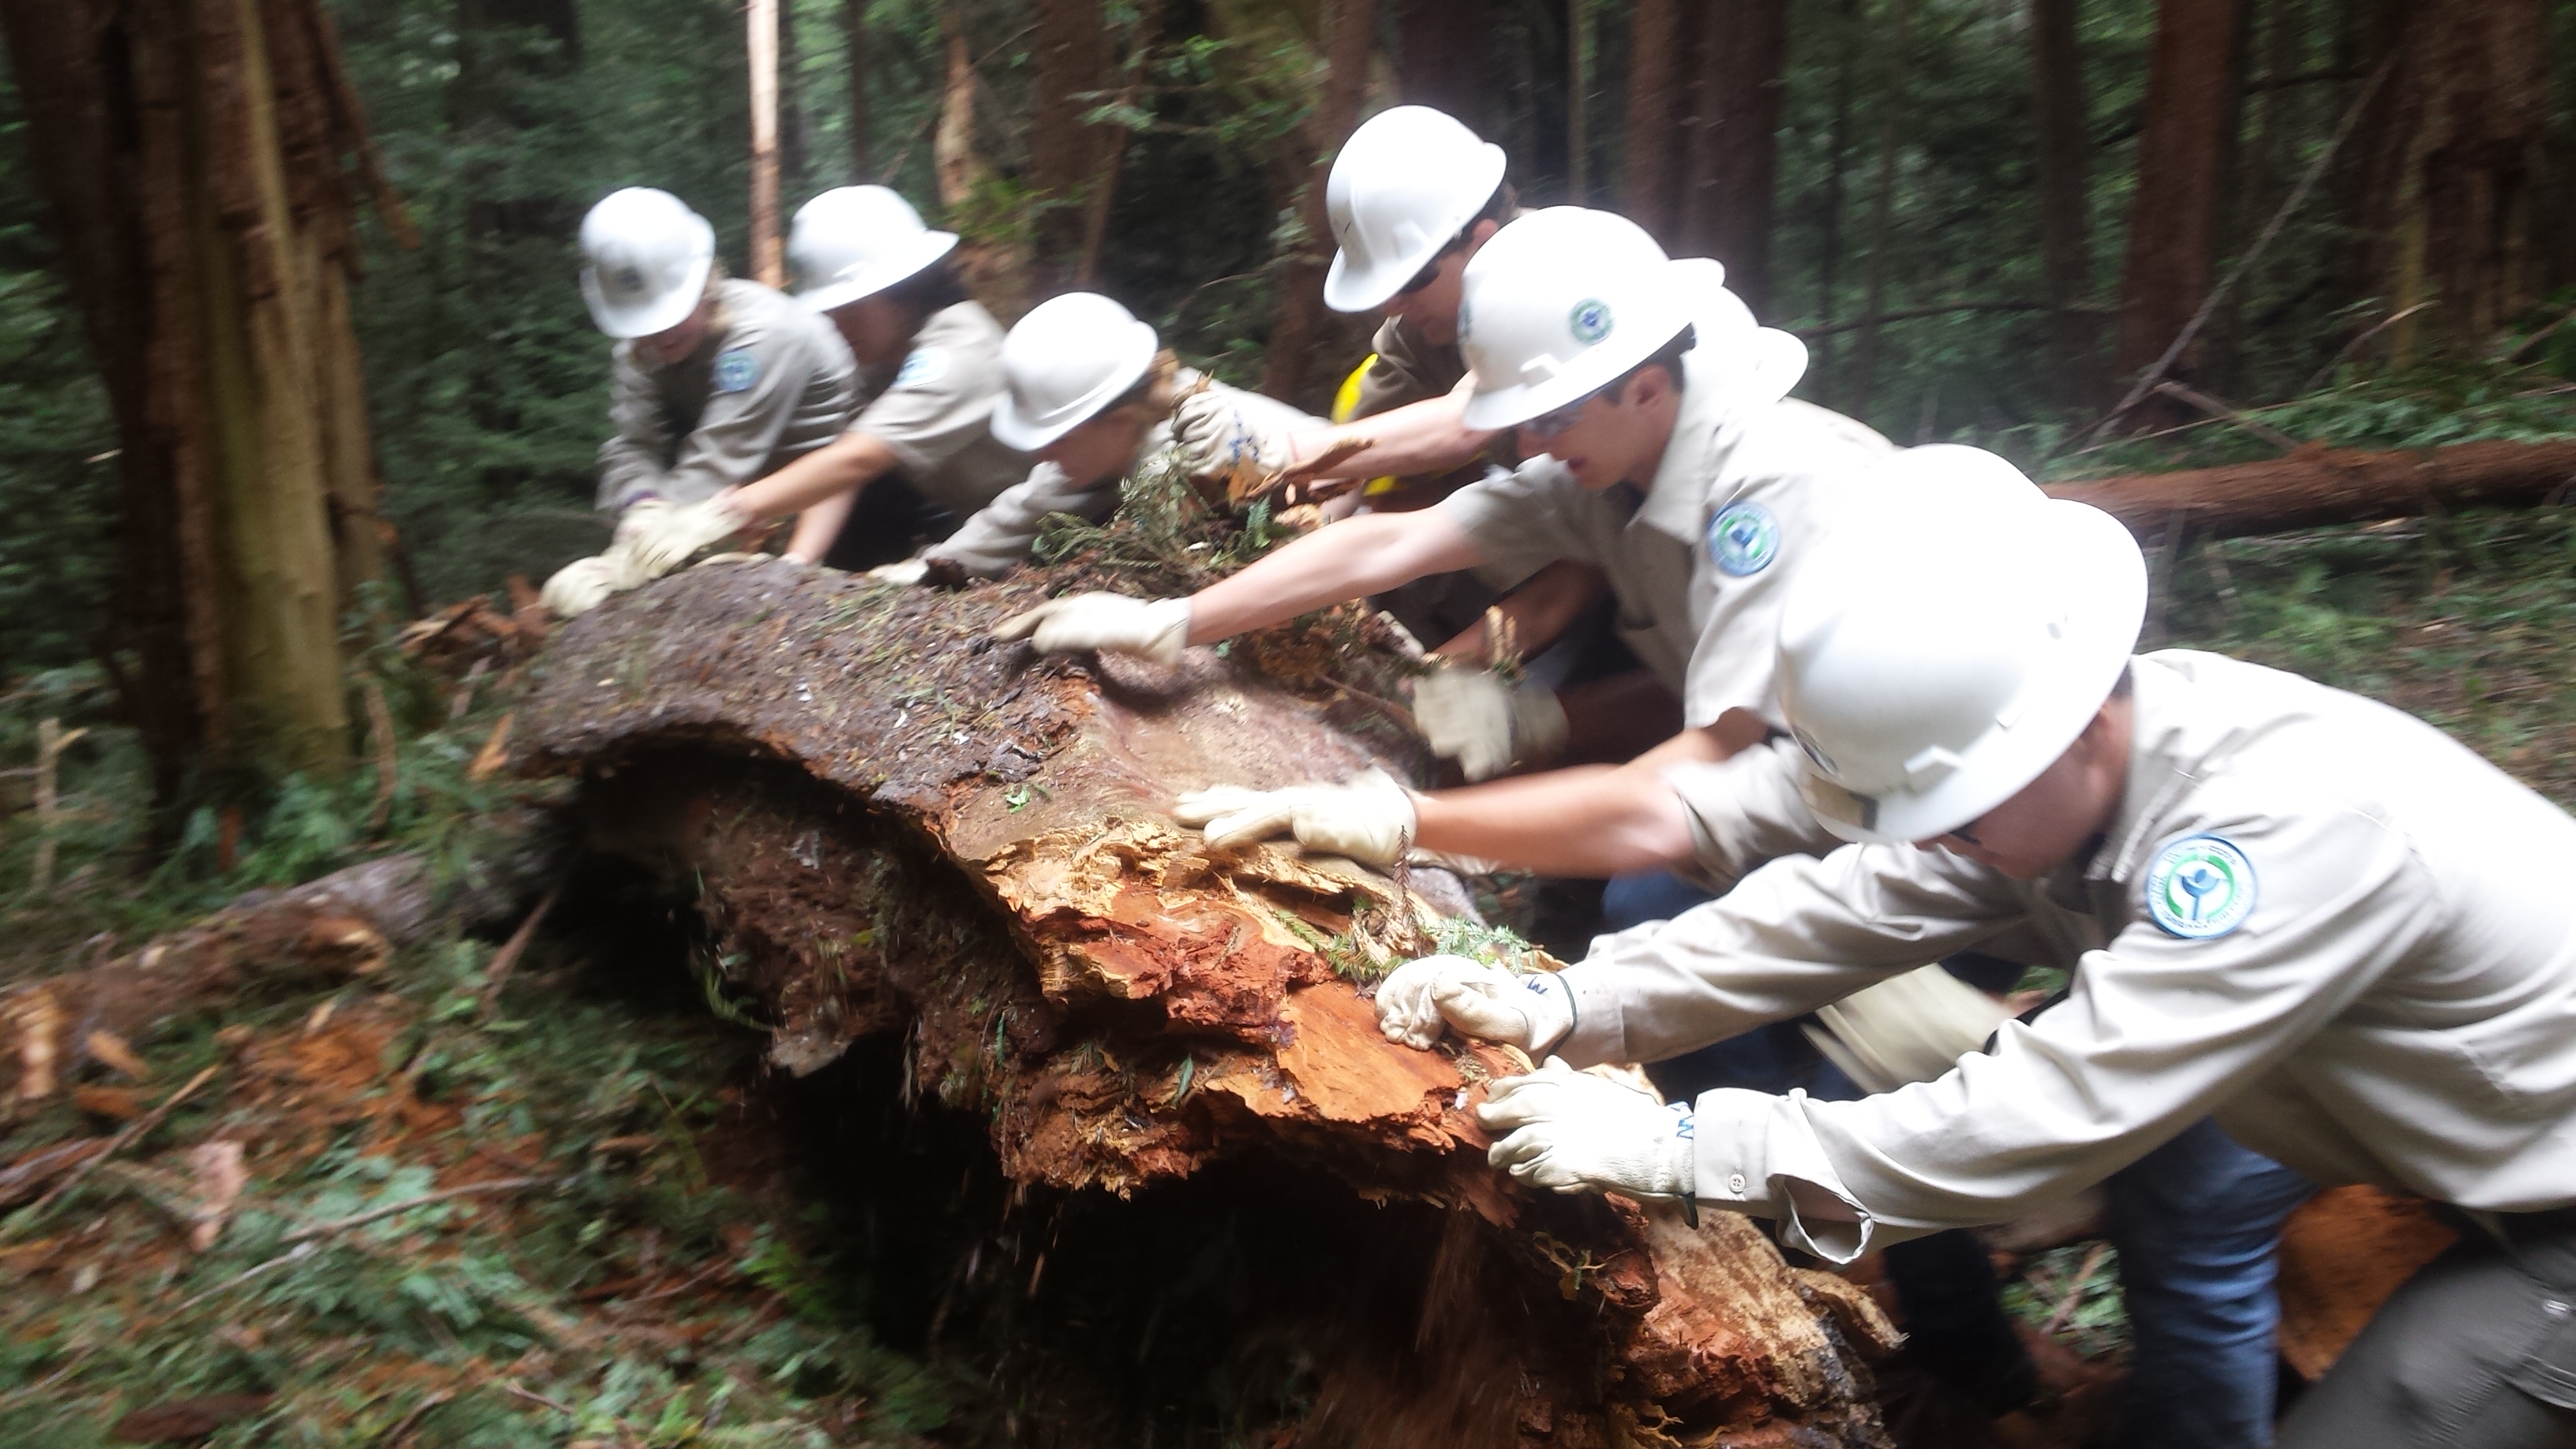 Six youth in white helmets push a log.